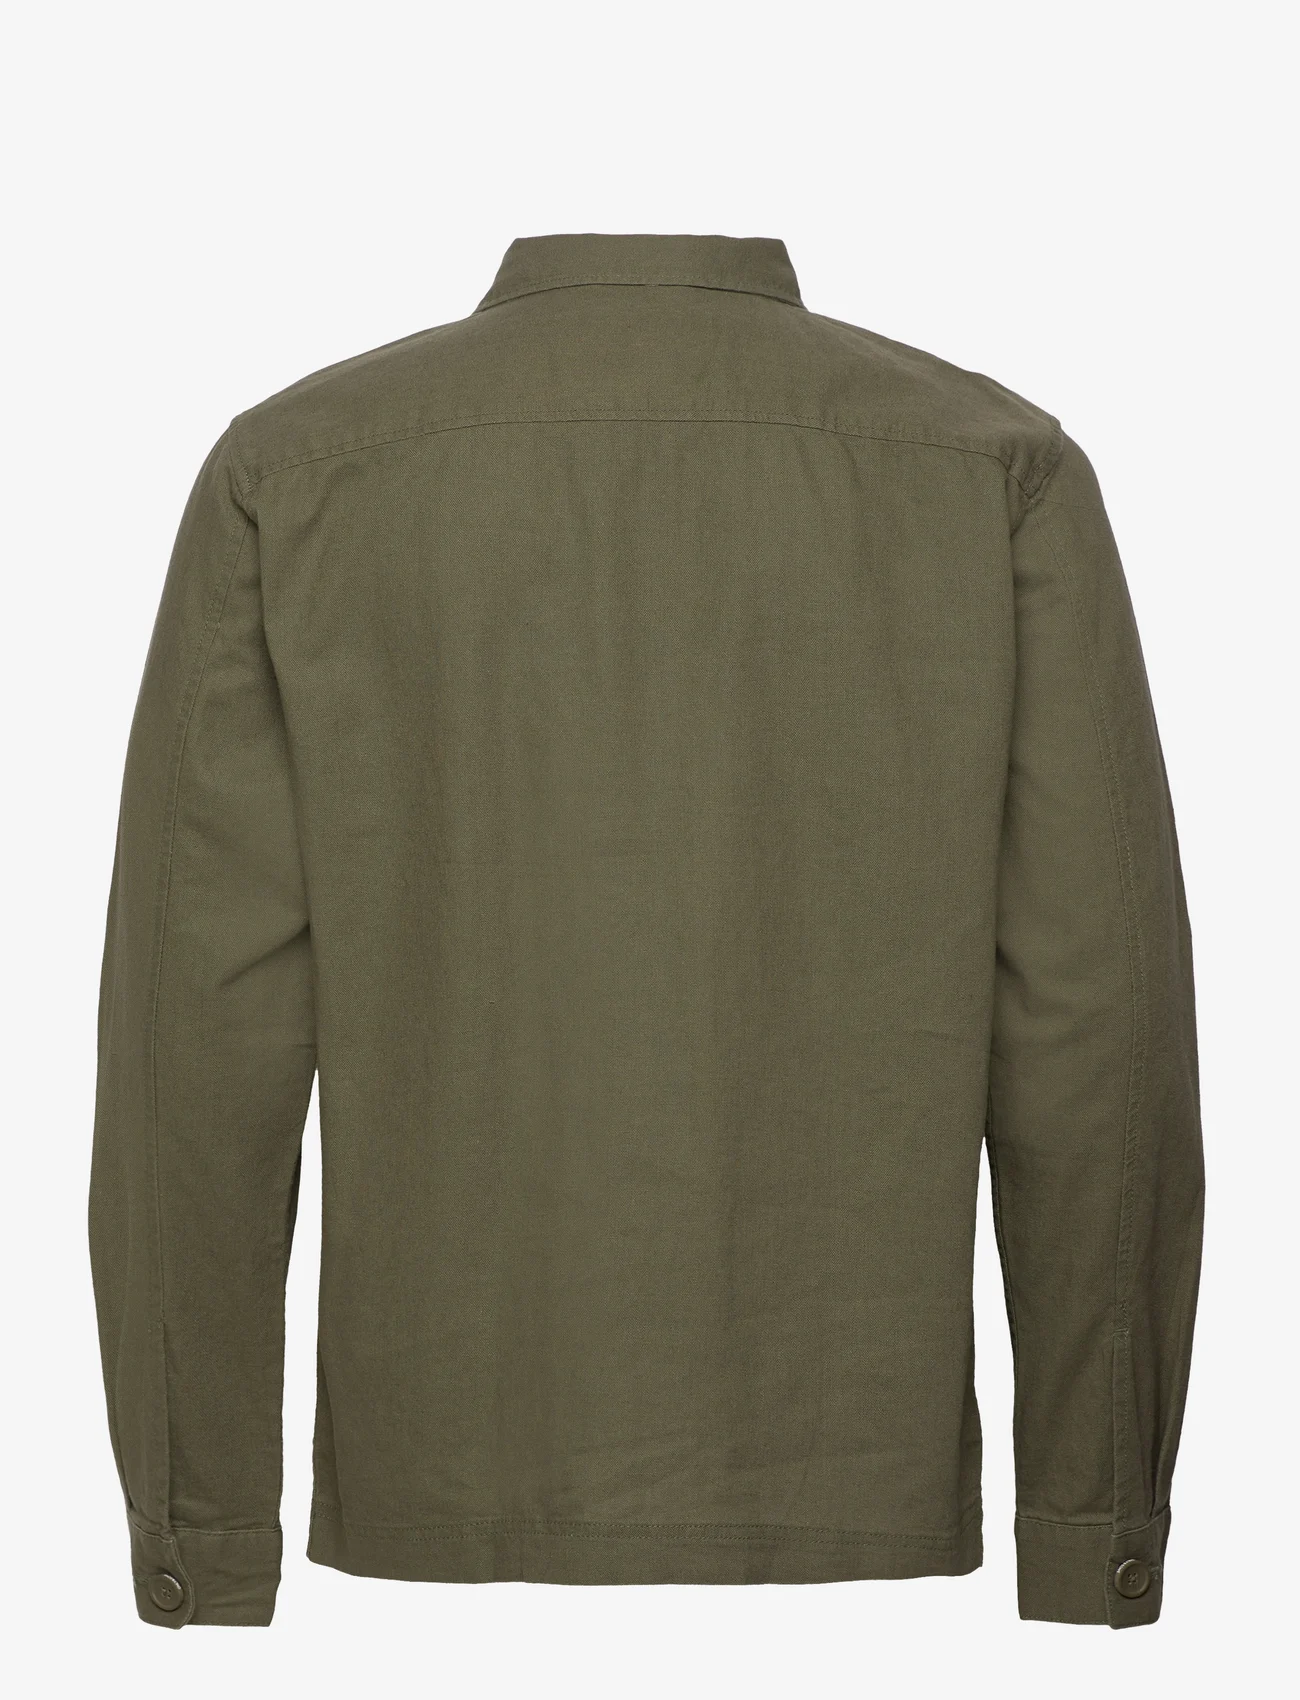 ONLY & SONS - ONSKIER 0019 COT LIN OVERSHIRT - olive night - 1